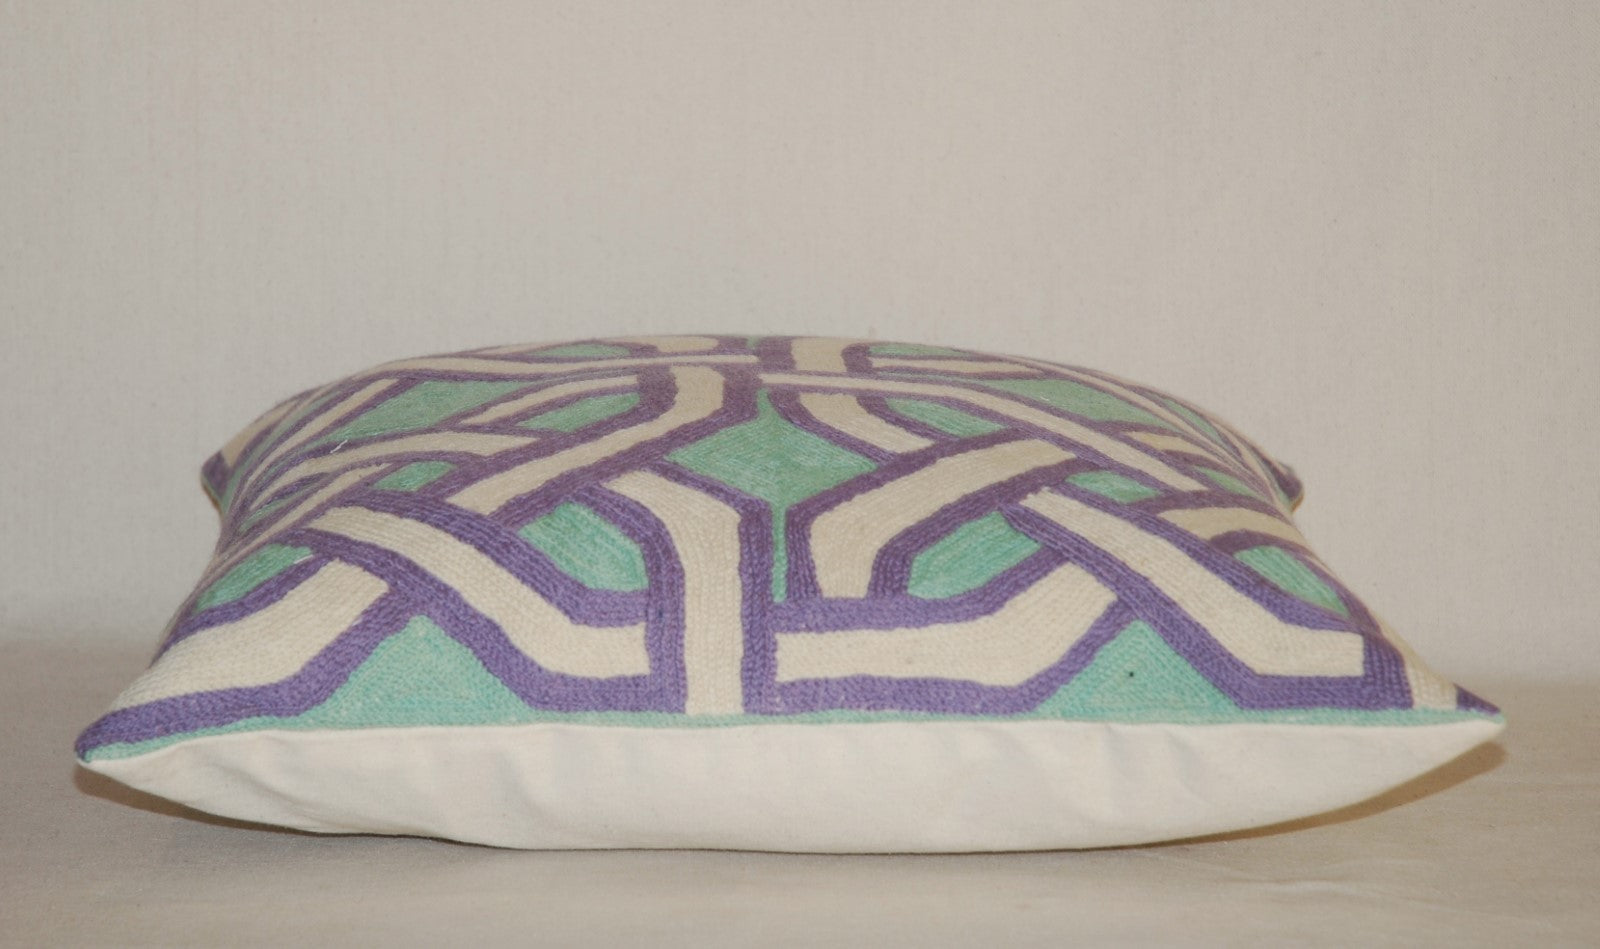 Crewel Embroidery Throw Pillow Cushion Cover, Purple and Teal #CW-1103